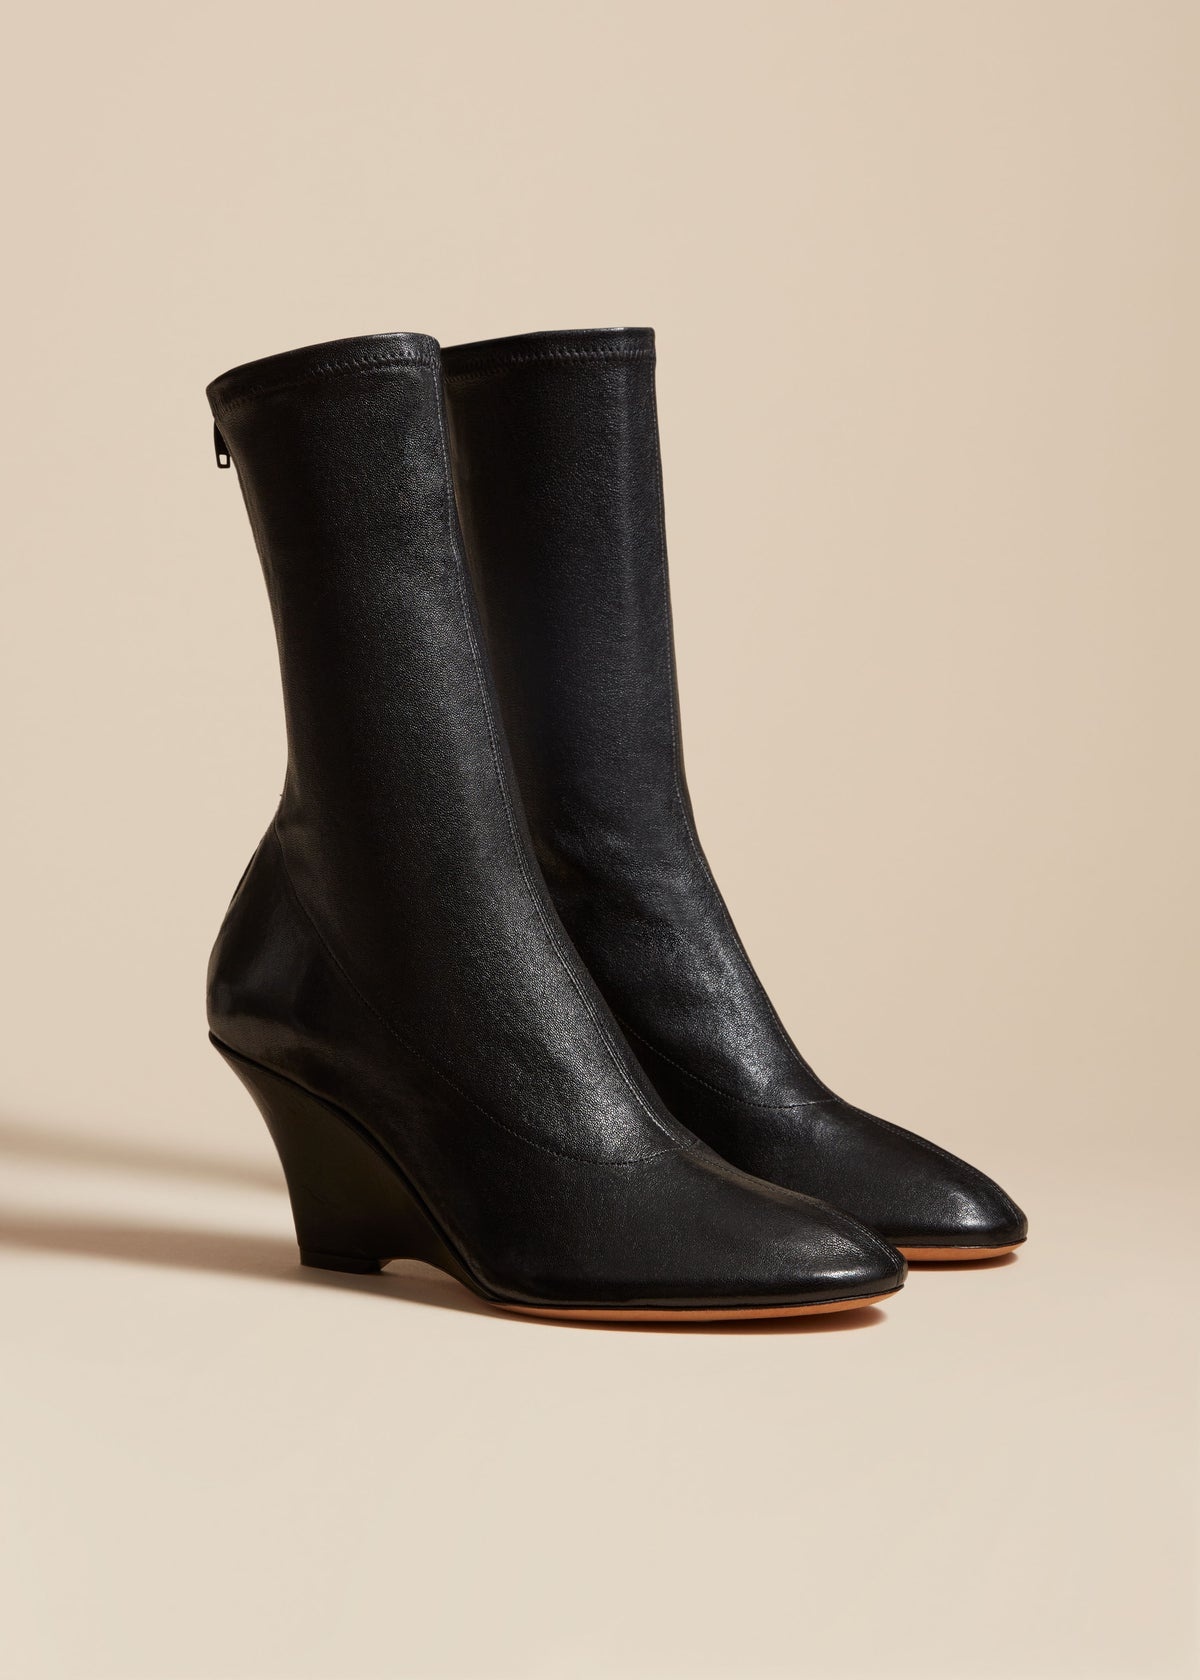 The Apollo Wedge Boot in Black Leather - 2